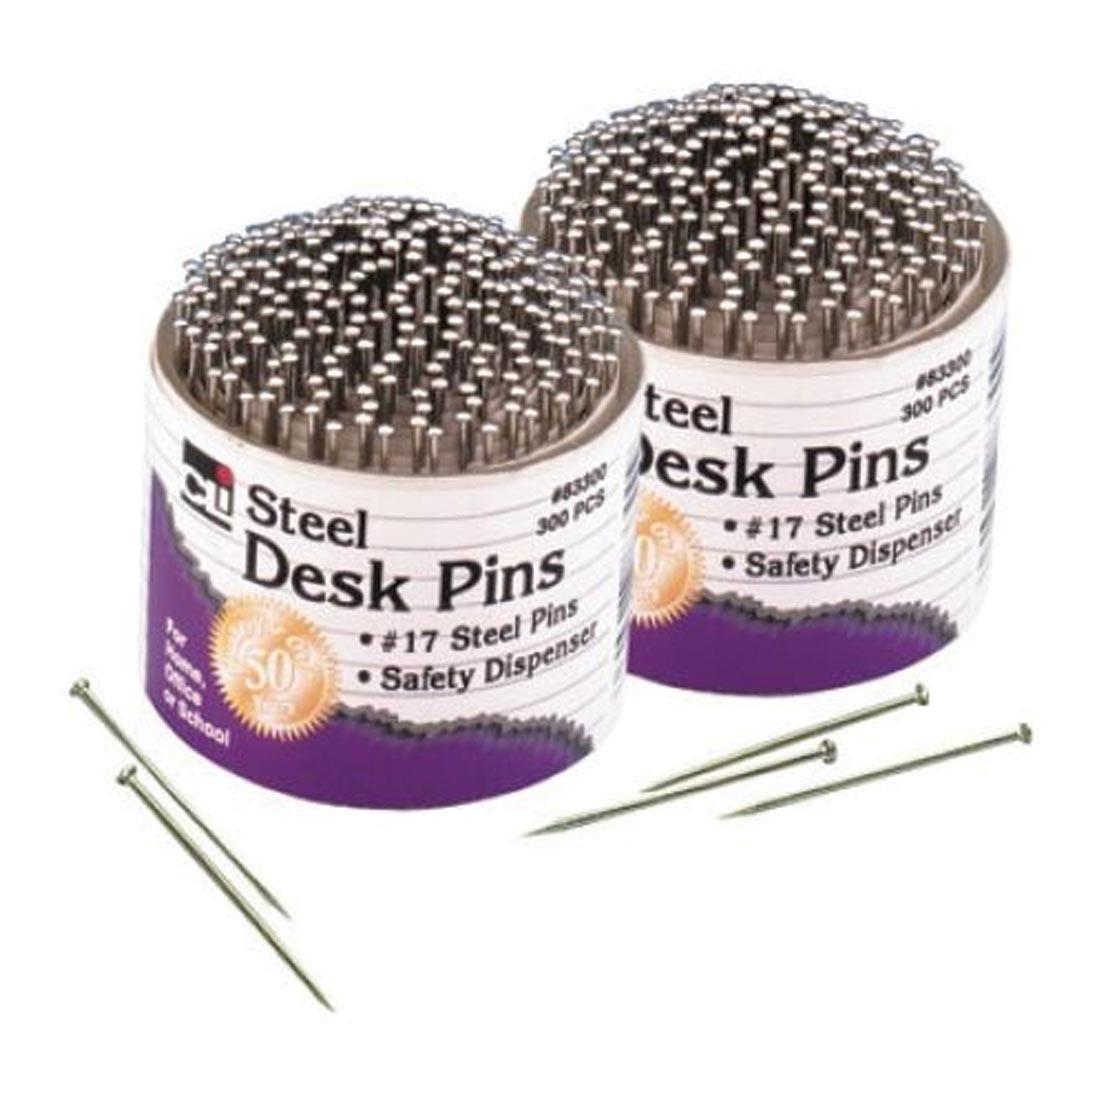 Two Dispensers of Straight Steel Desk Pins